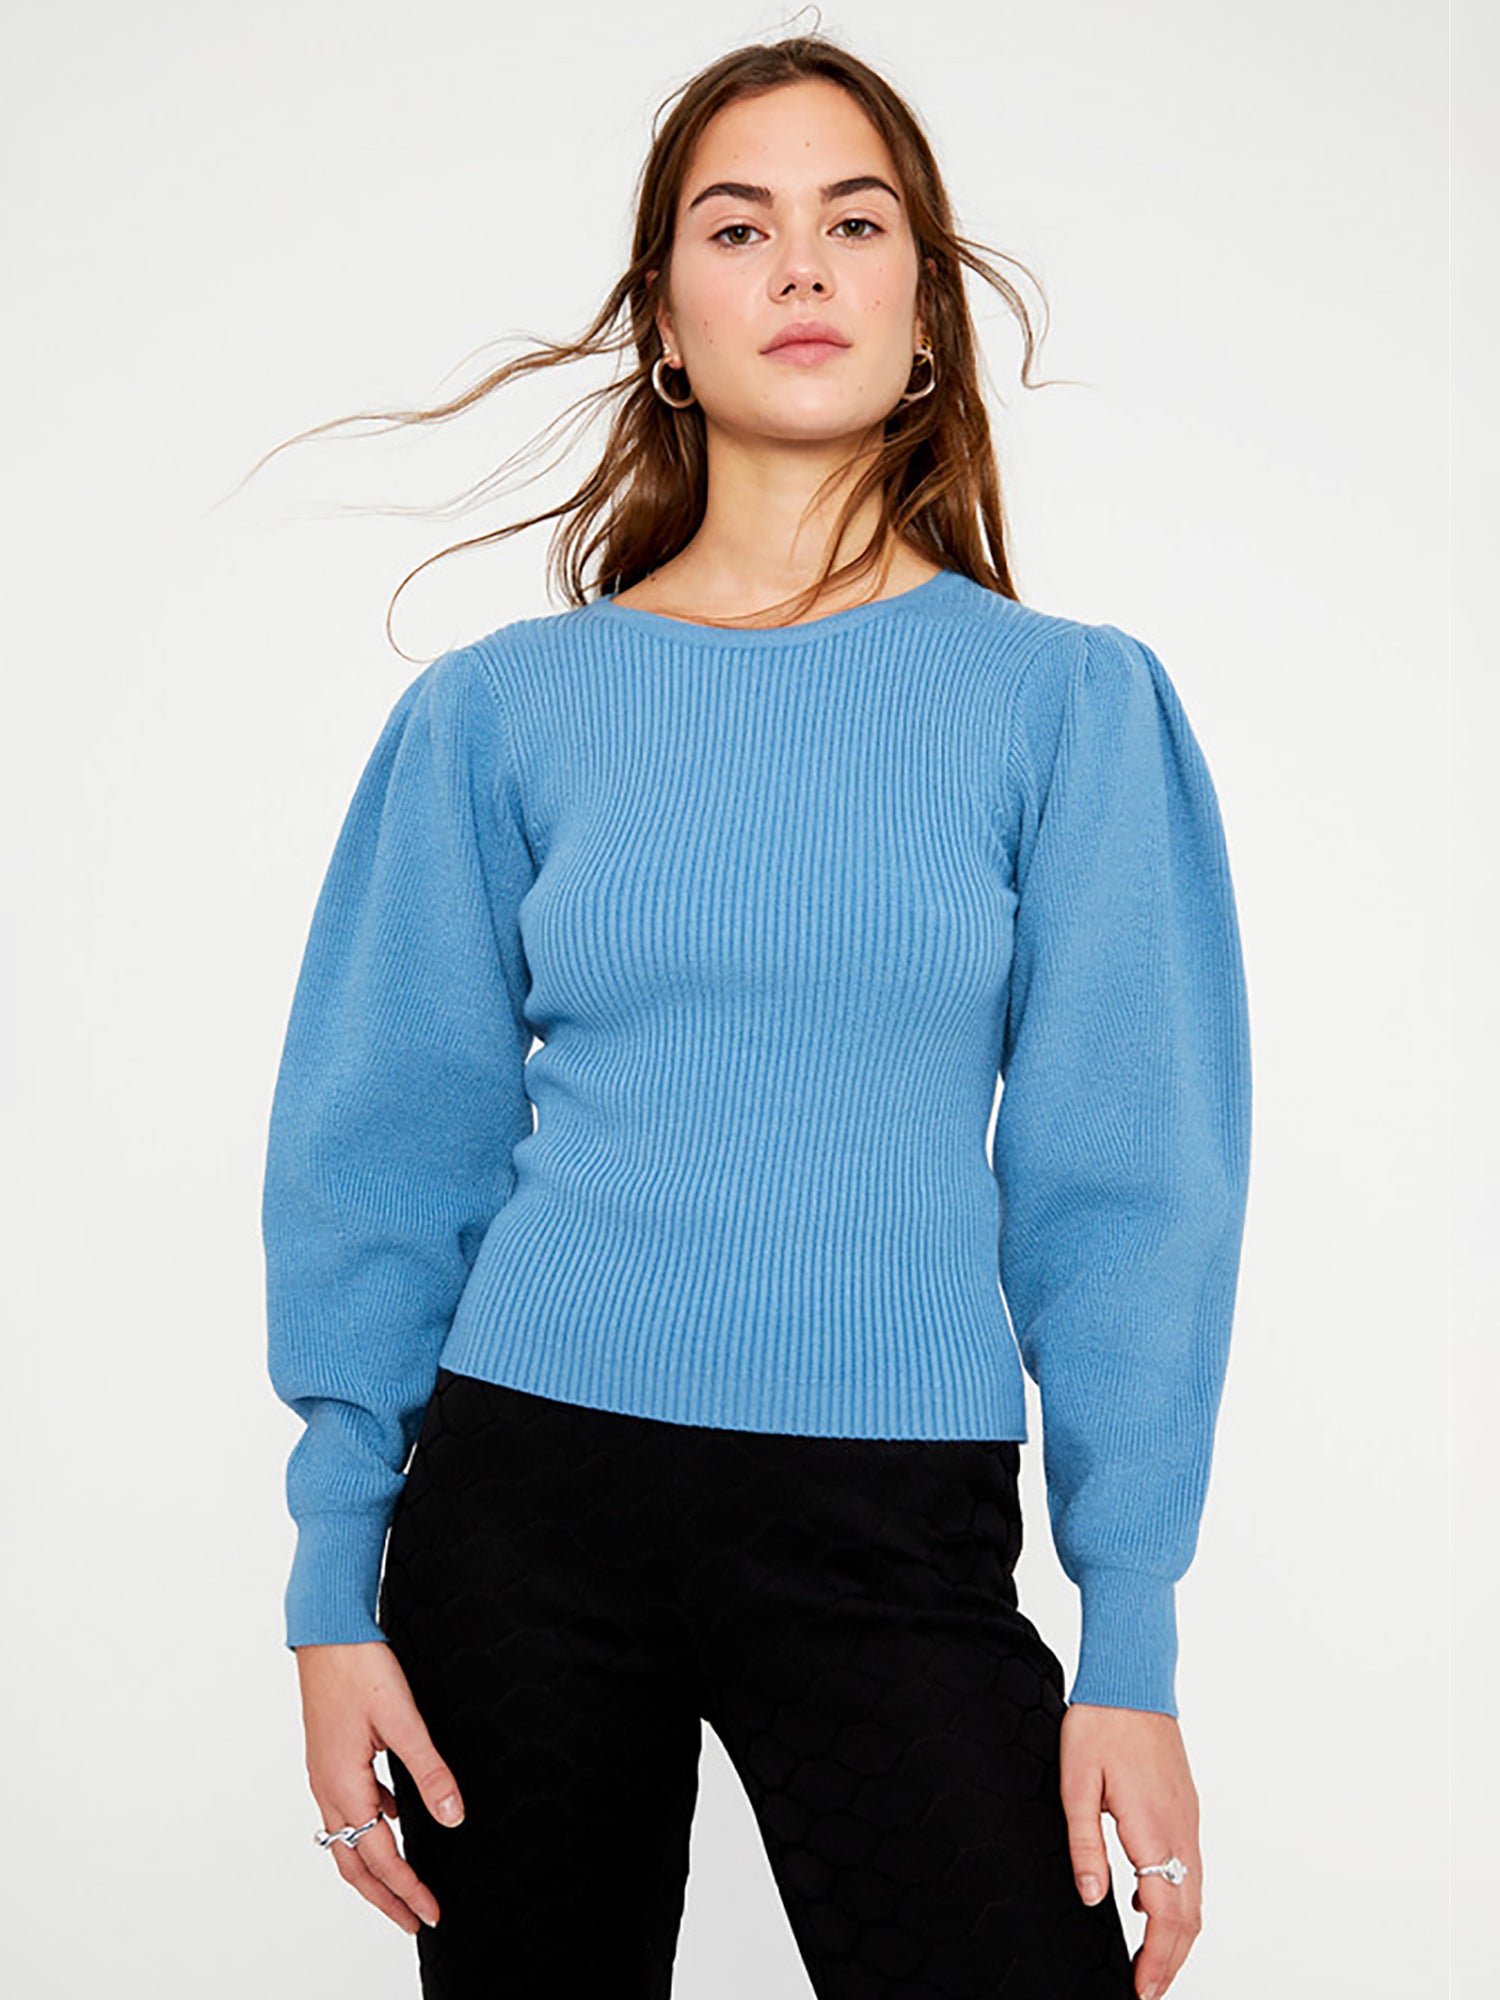 Wild Pony Ribbed Puff Sleeve Top - Shirts & Tops